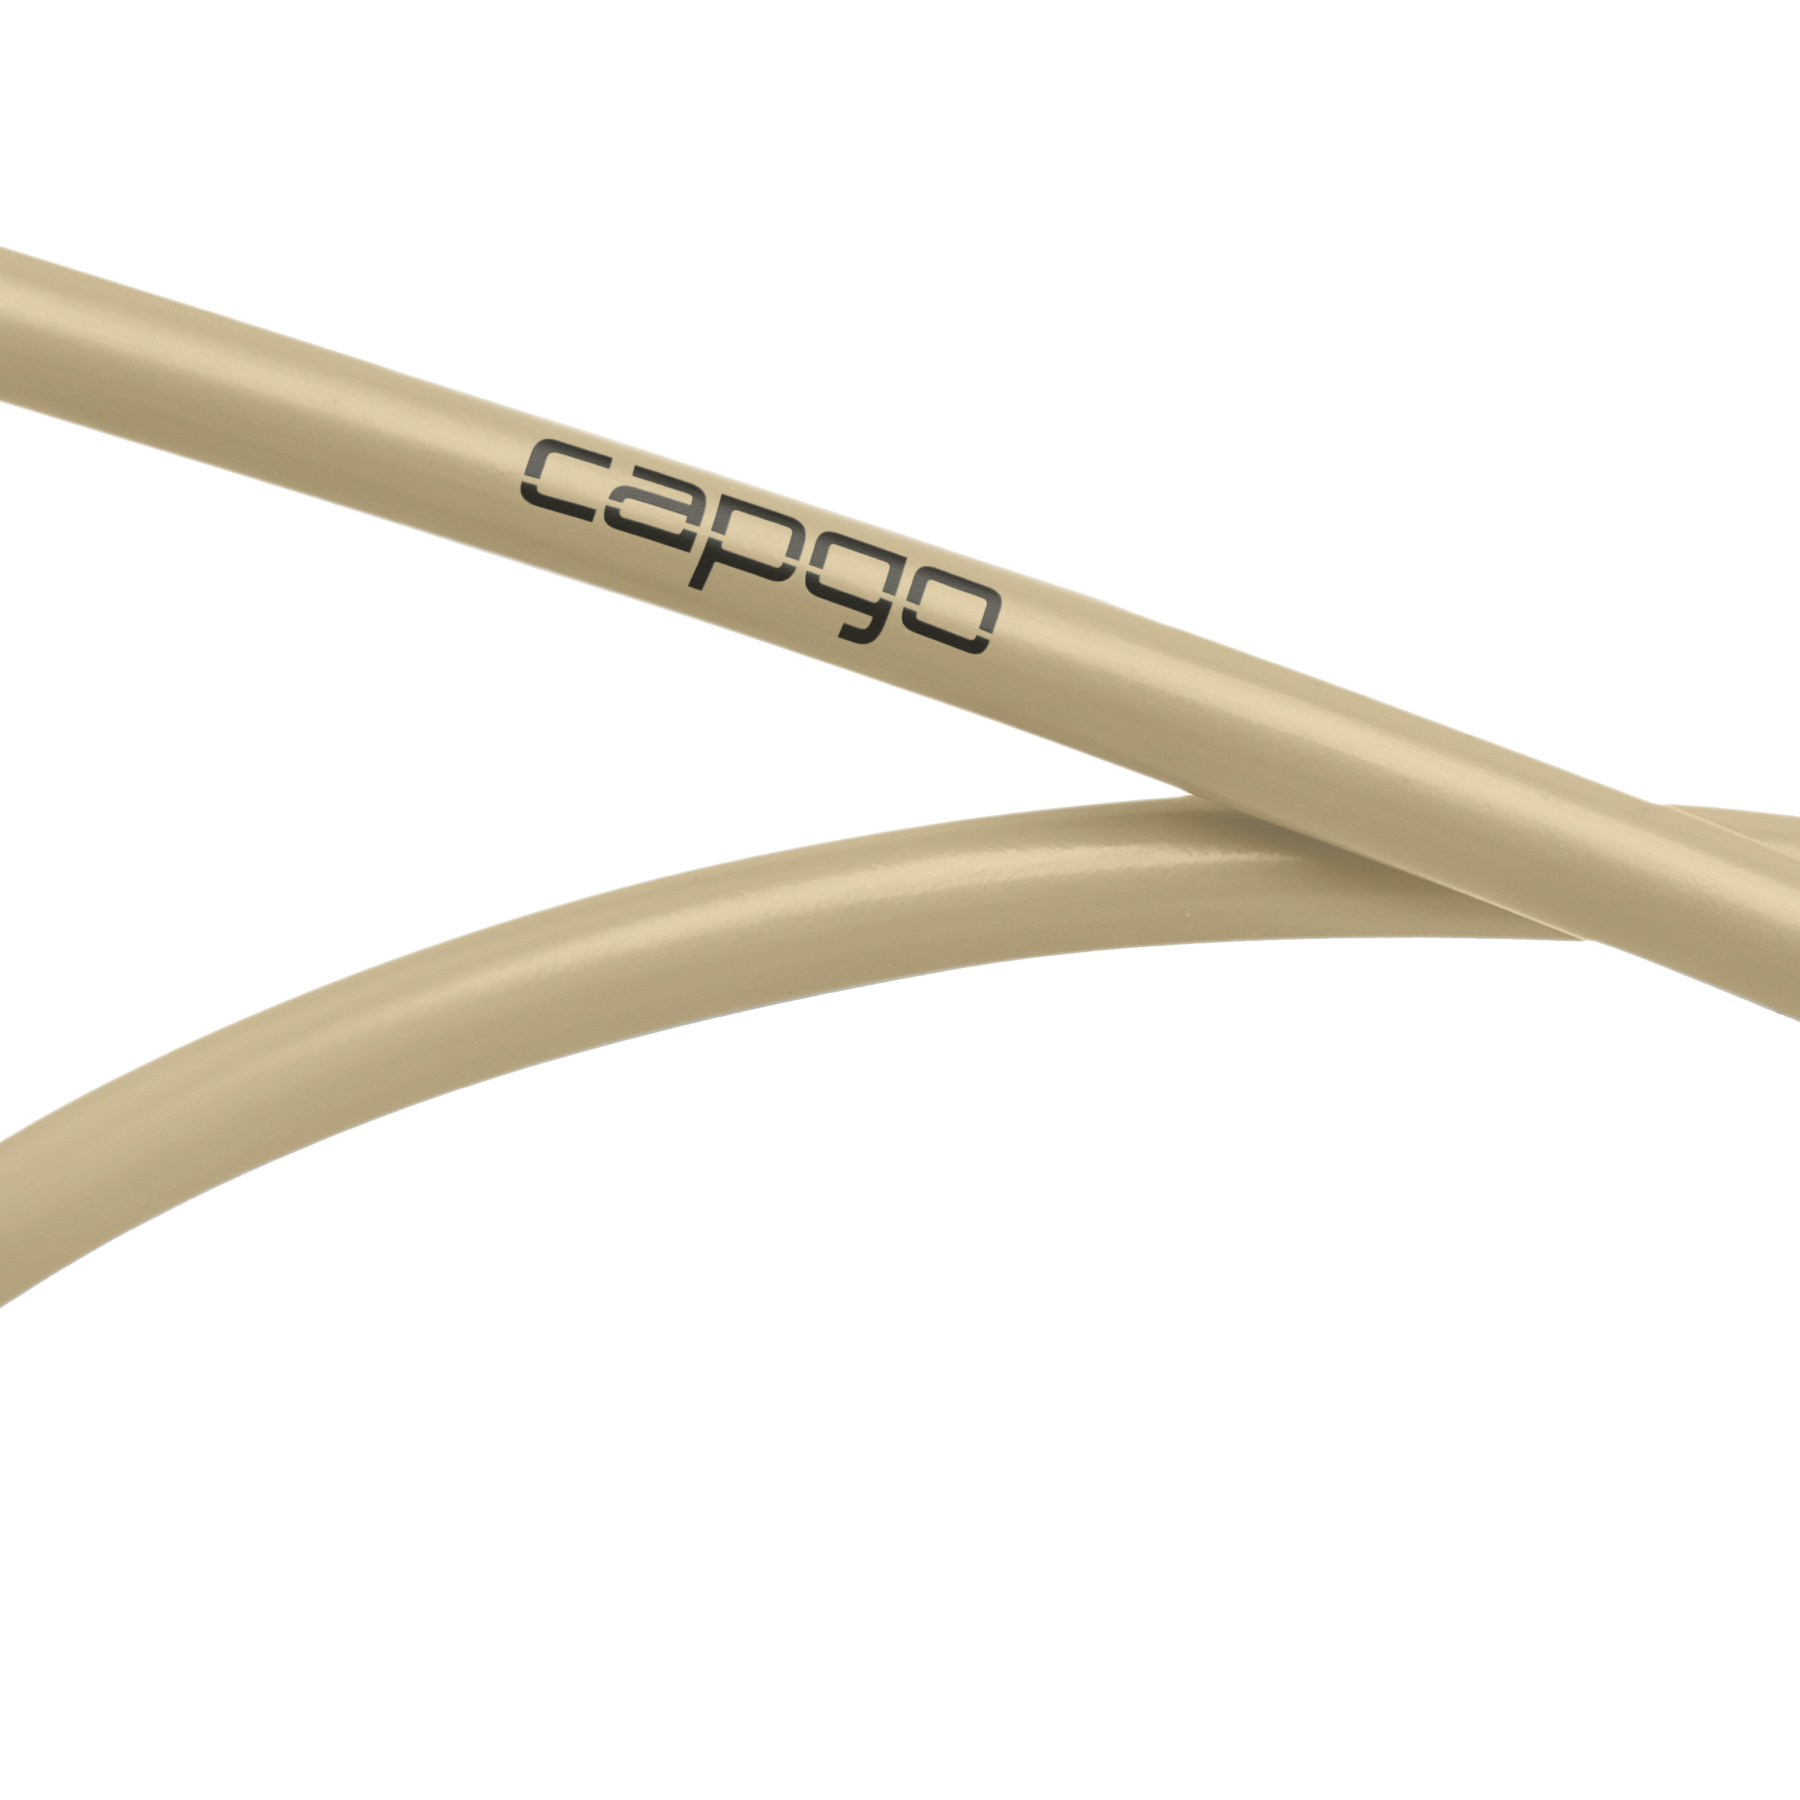 Picture of capgo Blue Line Brake Cable Housing - 5 mm - PTFE - 3000 mm - cream